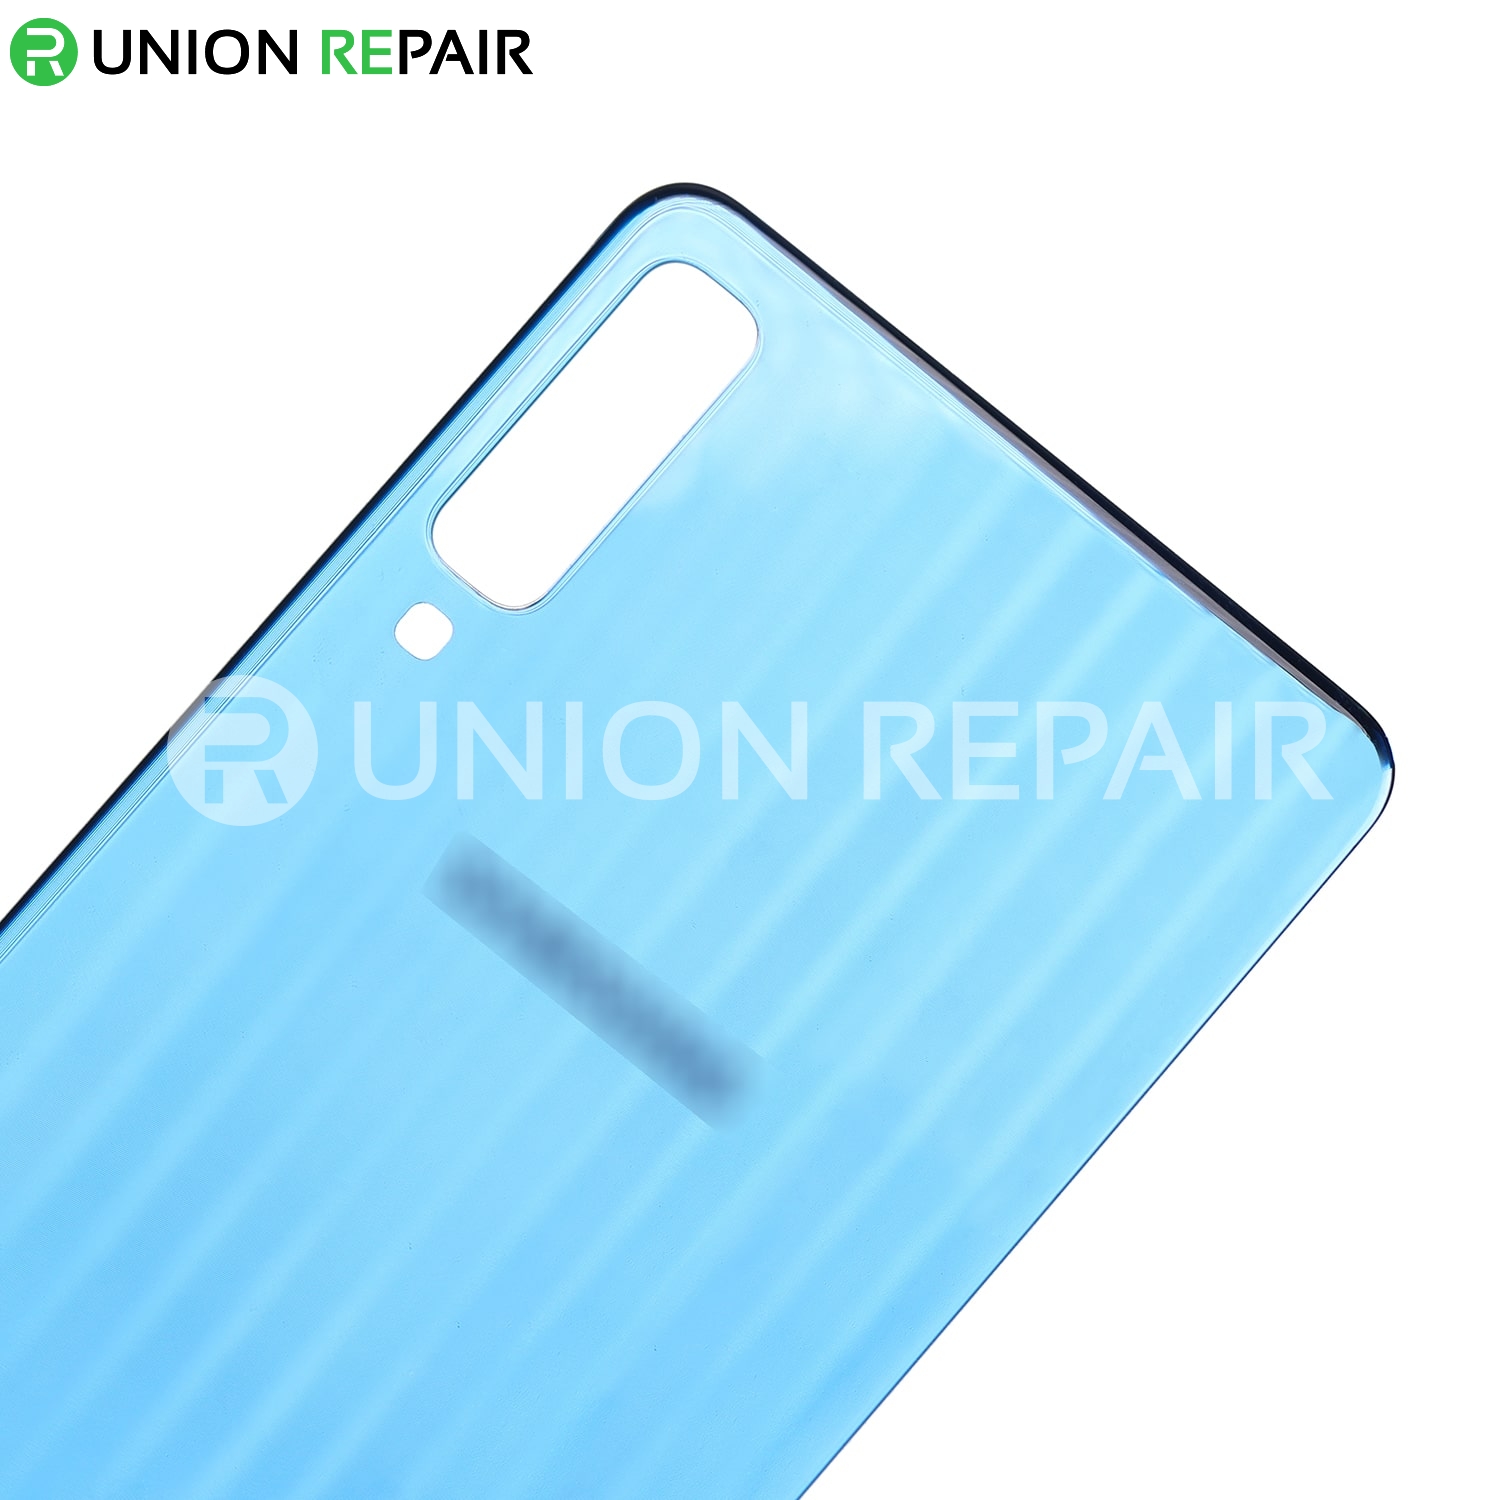 Replacement for Samsung Galaxy A7 (2018) SM-A750 Battery Door - Blue